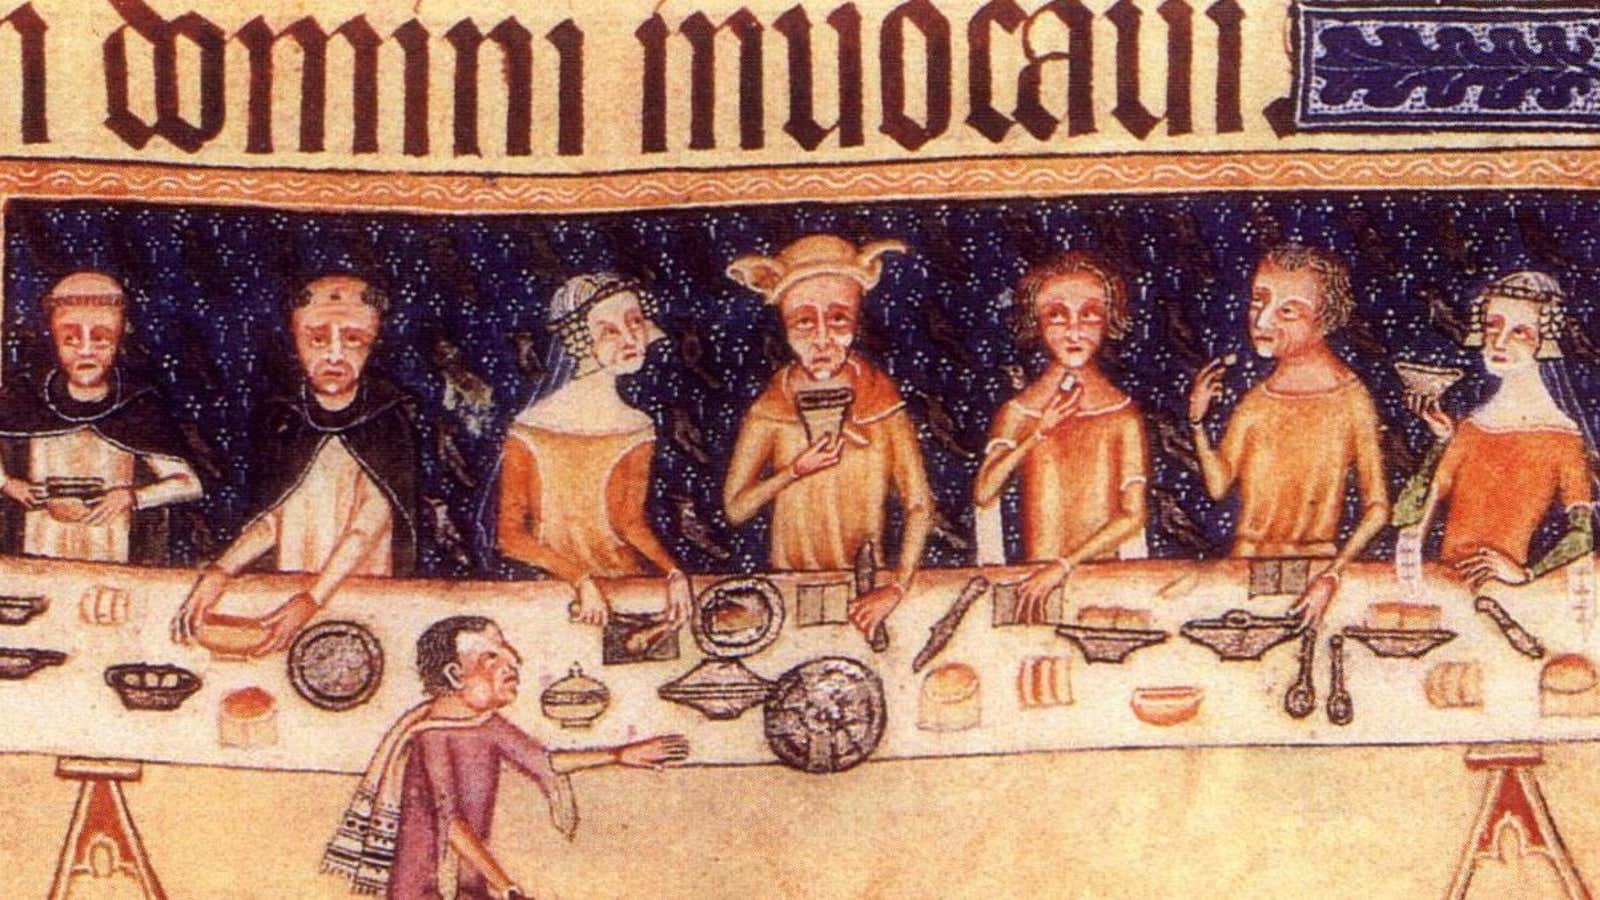 Mansplainers: Ruining dinner parties since the Middle Ages.